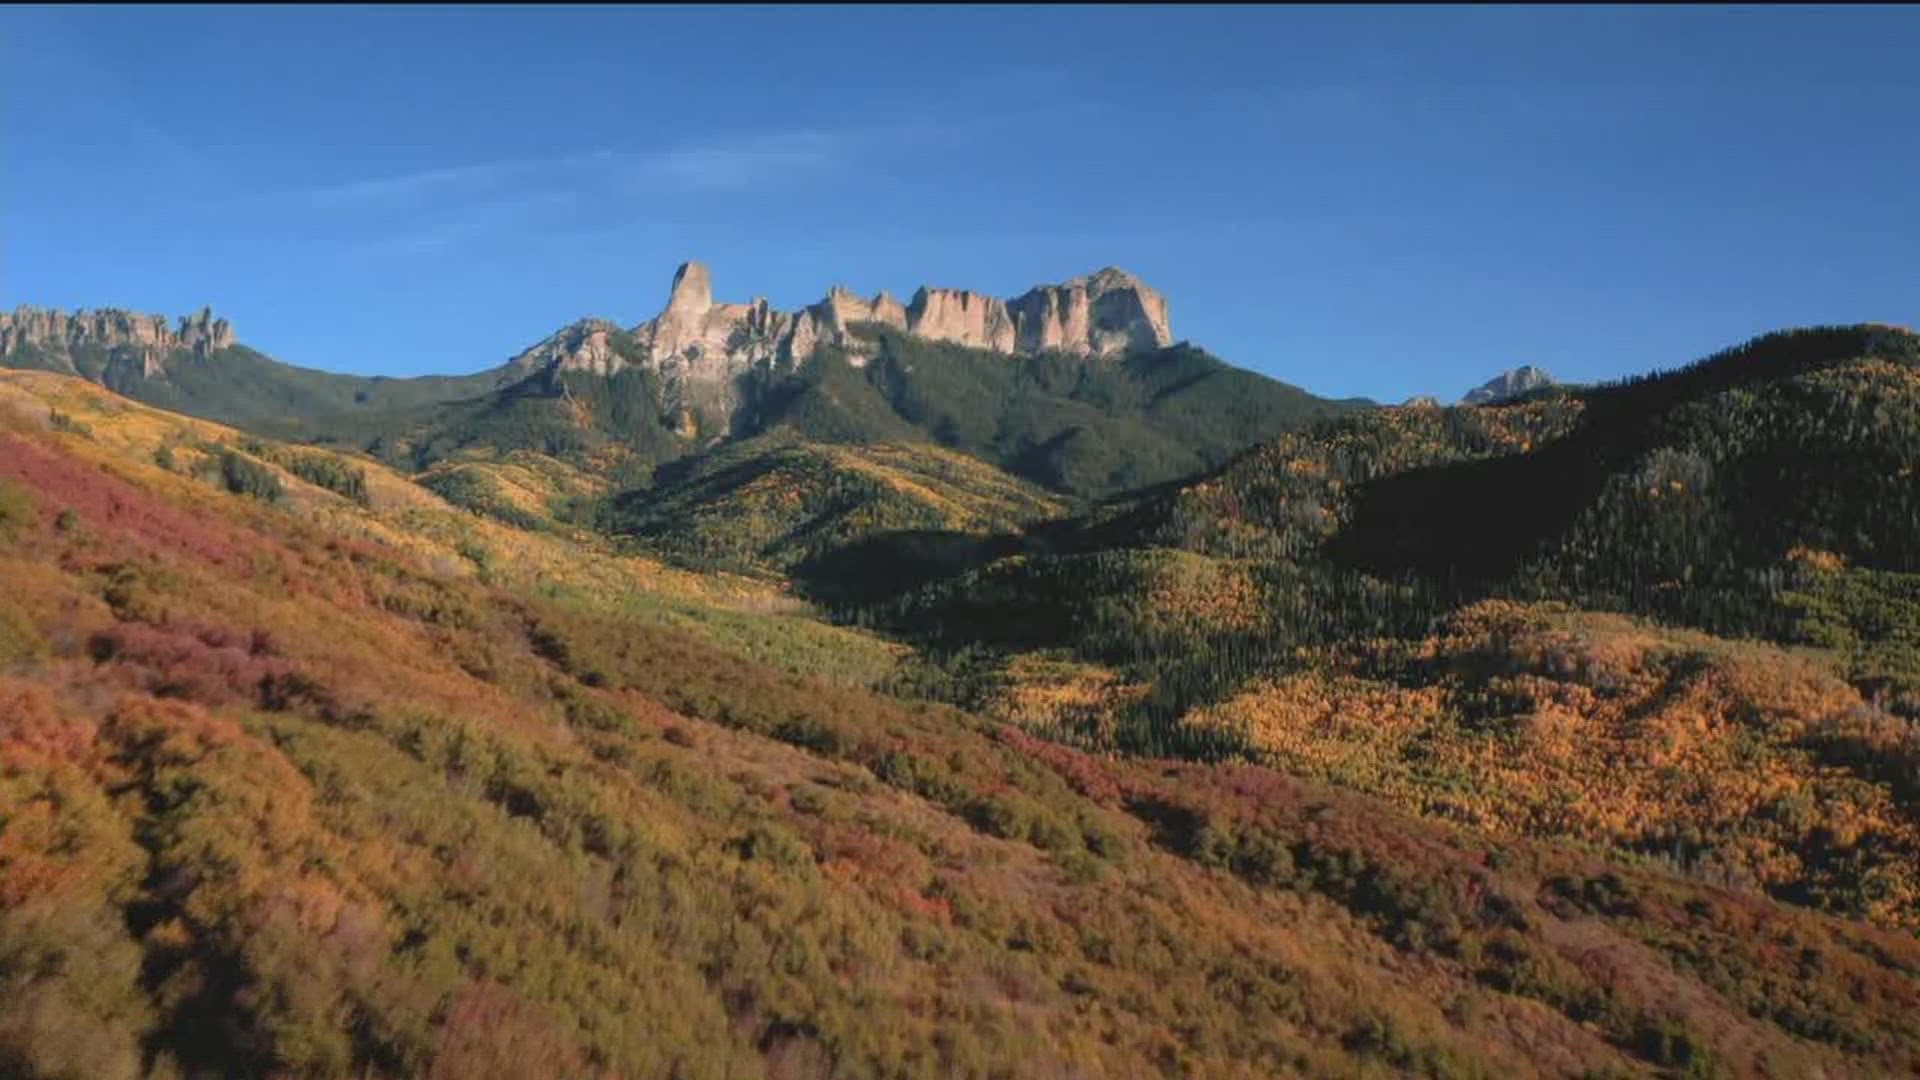 This documentary captures Colorado in a different light by diving into its diverse regions.